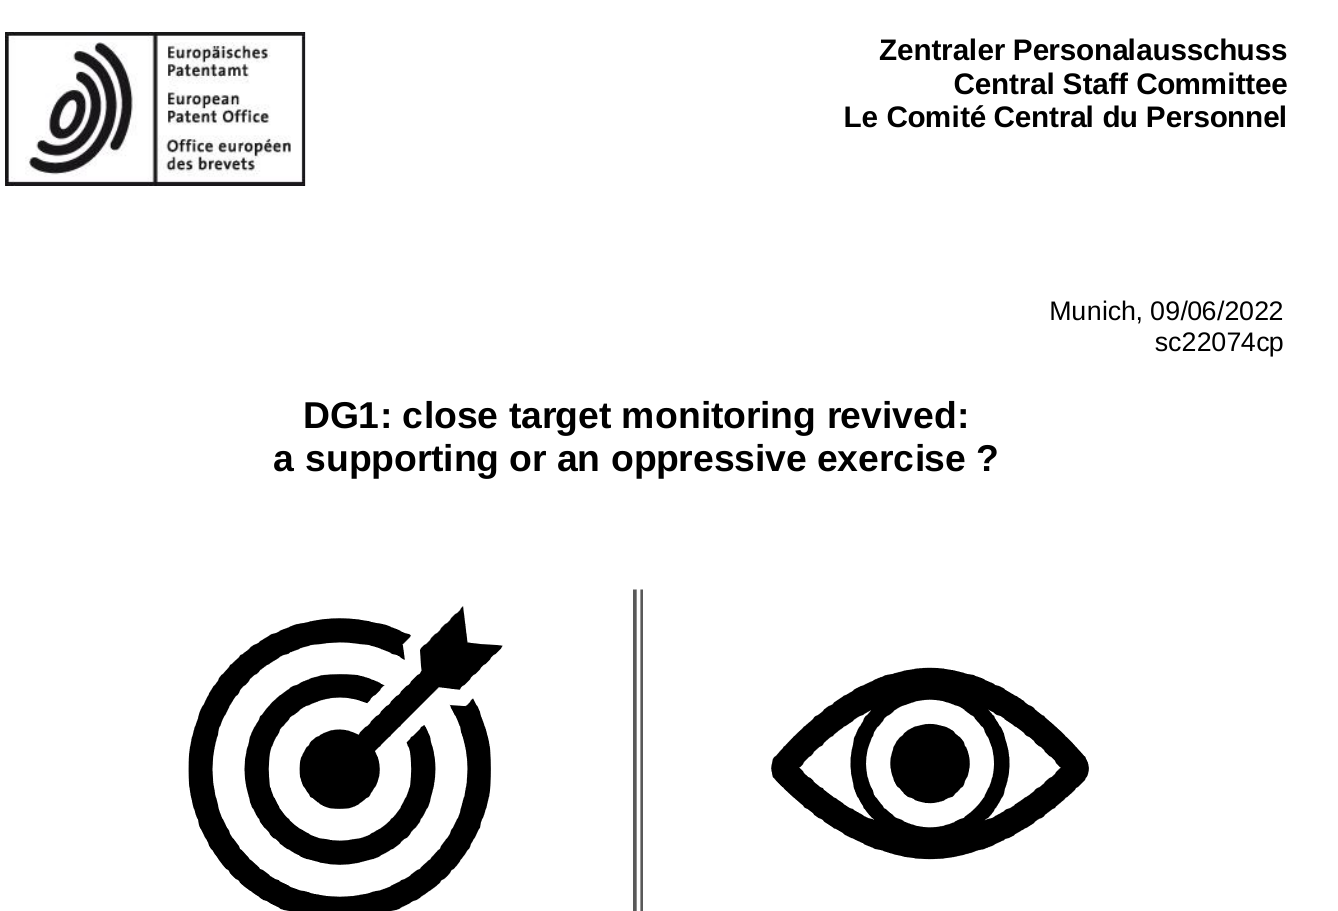 DG1: close target monitoring revived: a supporting or an oppressive exercise?